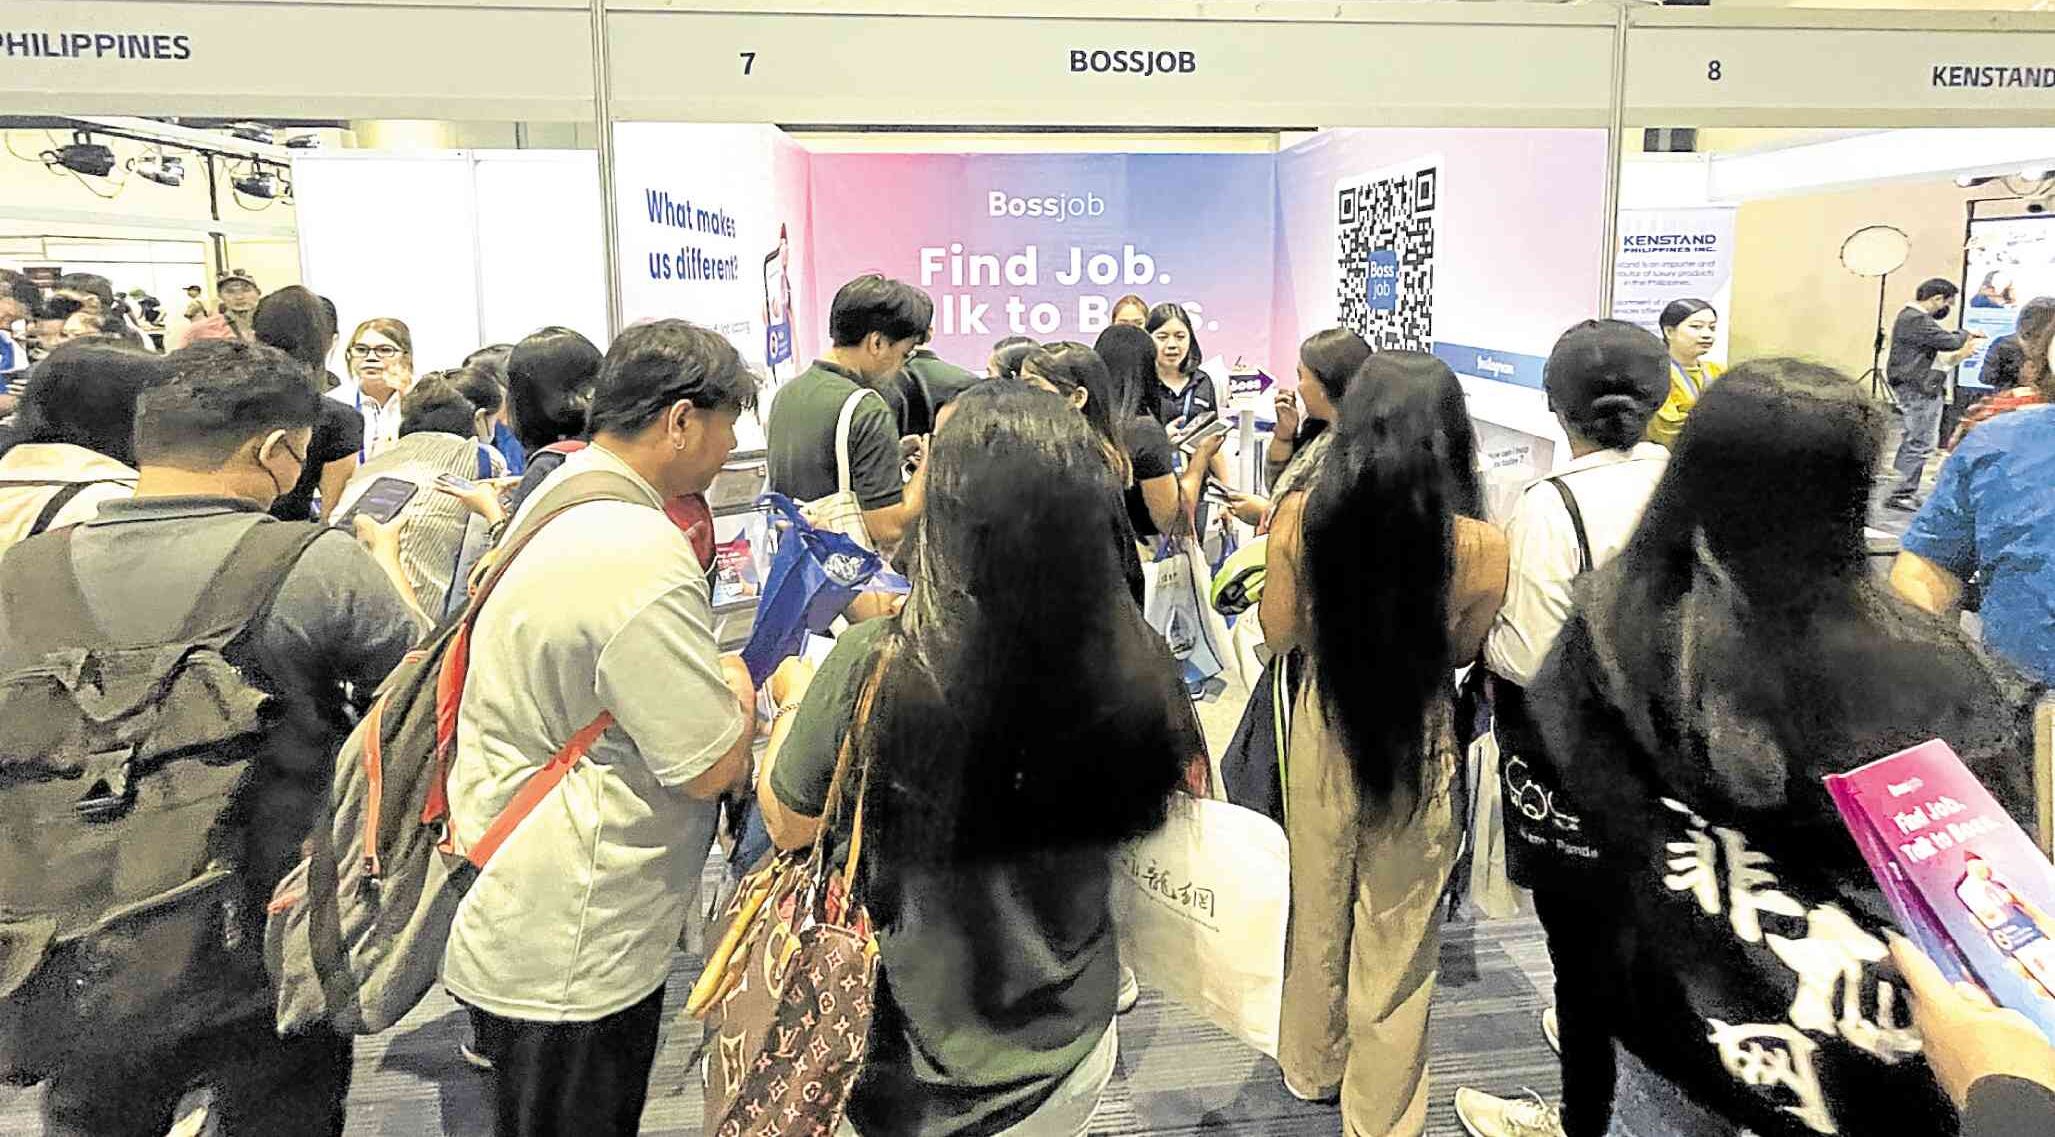 THE SEARCH Bossjob 2nd Fil-Chi Job Fair on Oct. 15 attracted more than 1,300 job hunters.